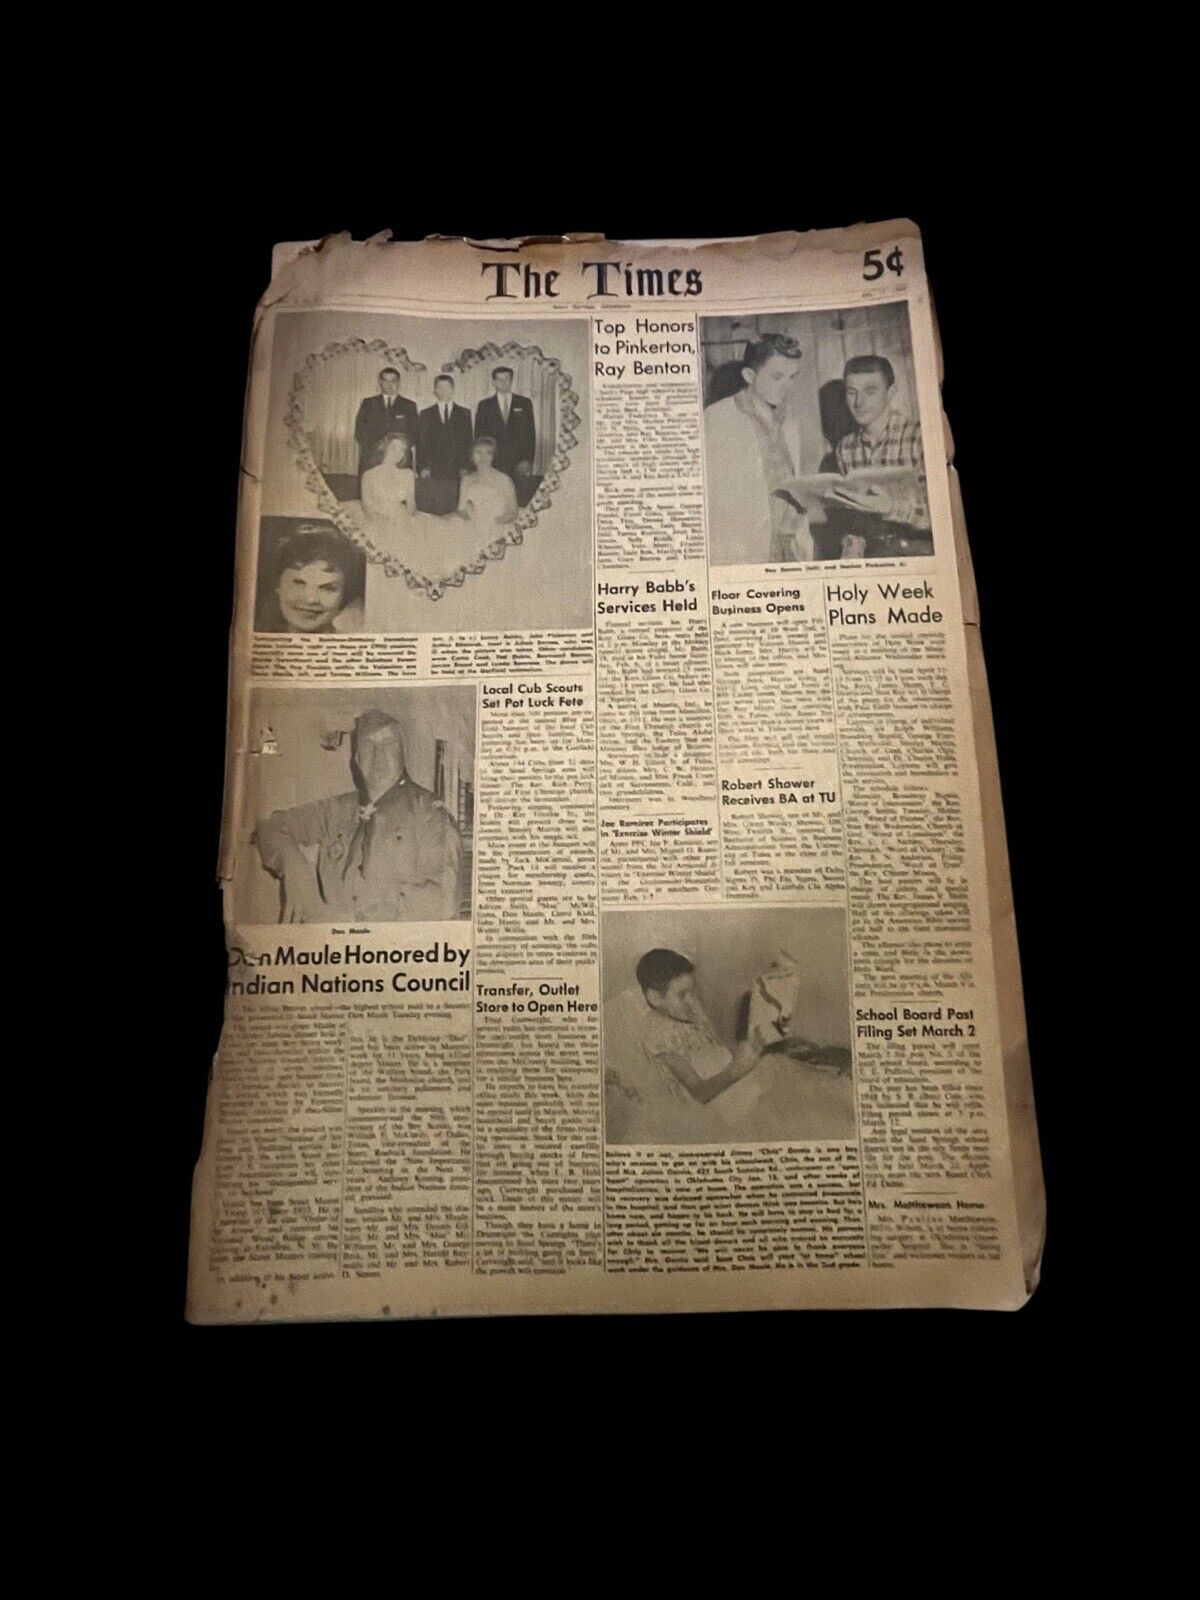 Vintage Newspaper. The Times. Sand Springs OK. Antique Advertisements. 1960